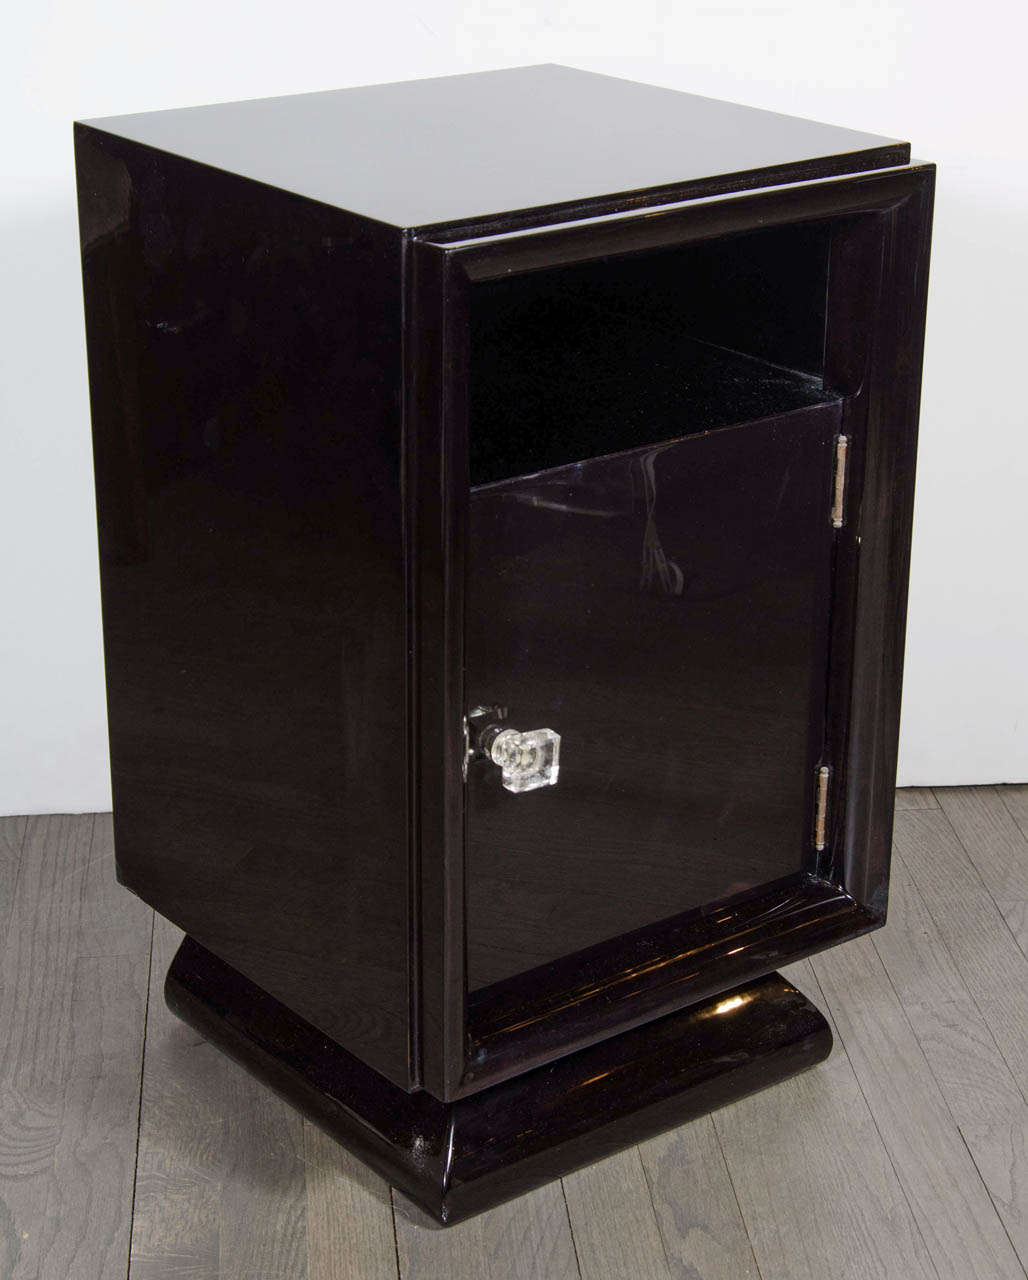 This elegant pair of shadow box nightstands/ end tables were realized in the United States, circa 1950. Realized in beautiful ebonized walnut, they feature a plinth base, a cut out shelf space above a cabinet concealed by a door fitted with a